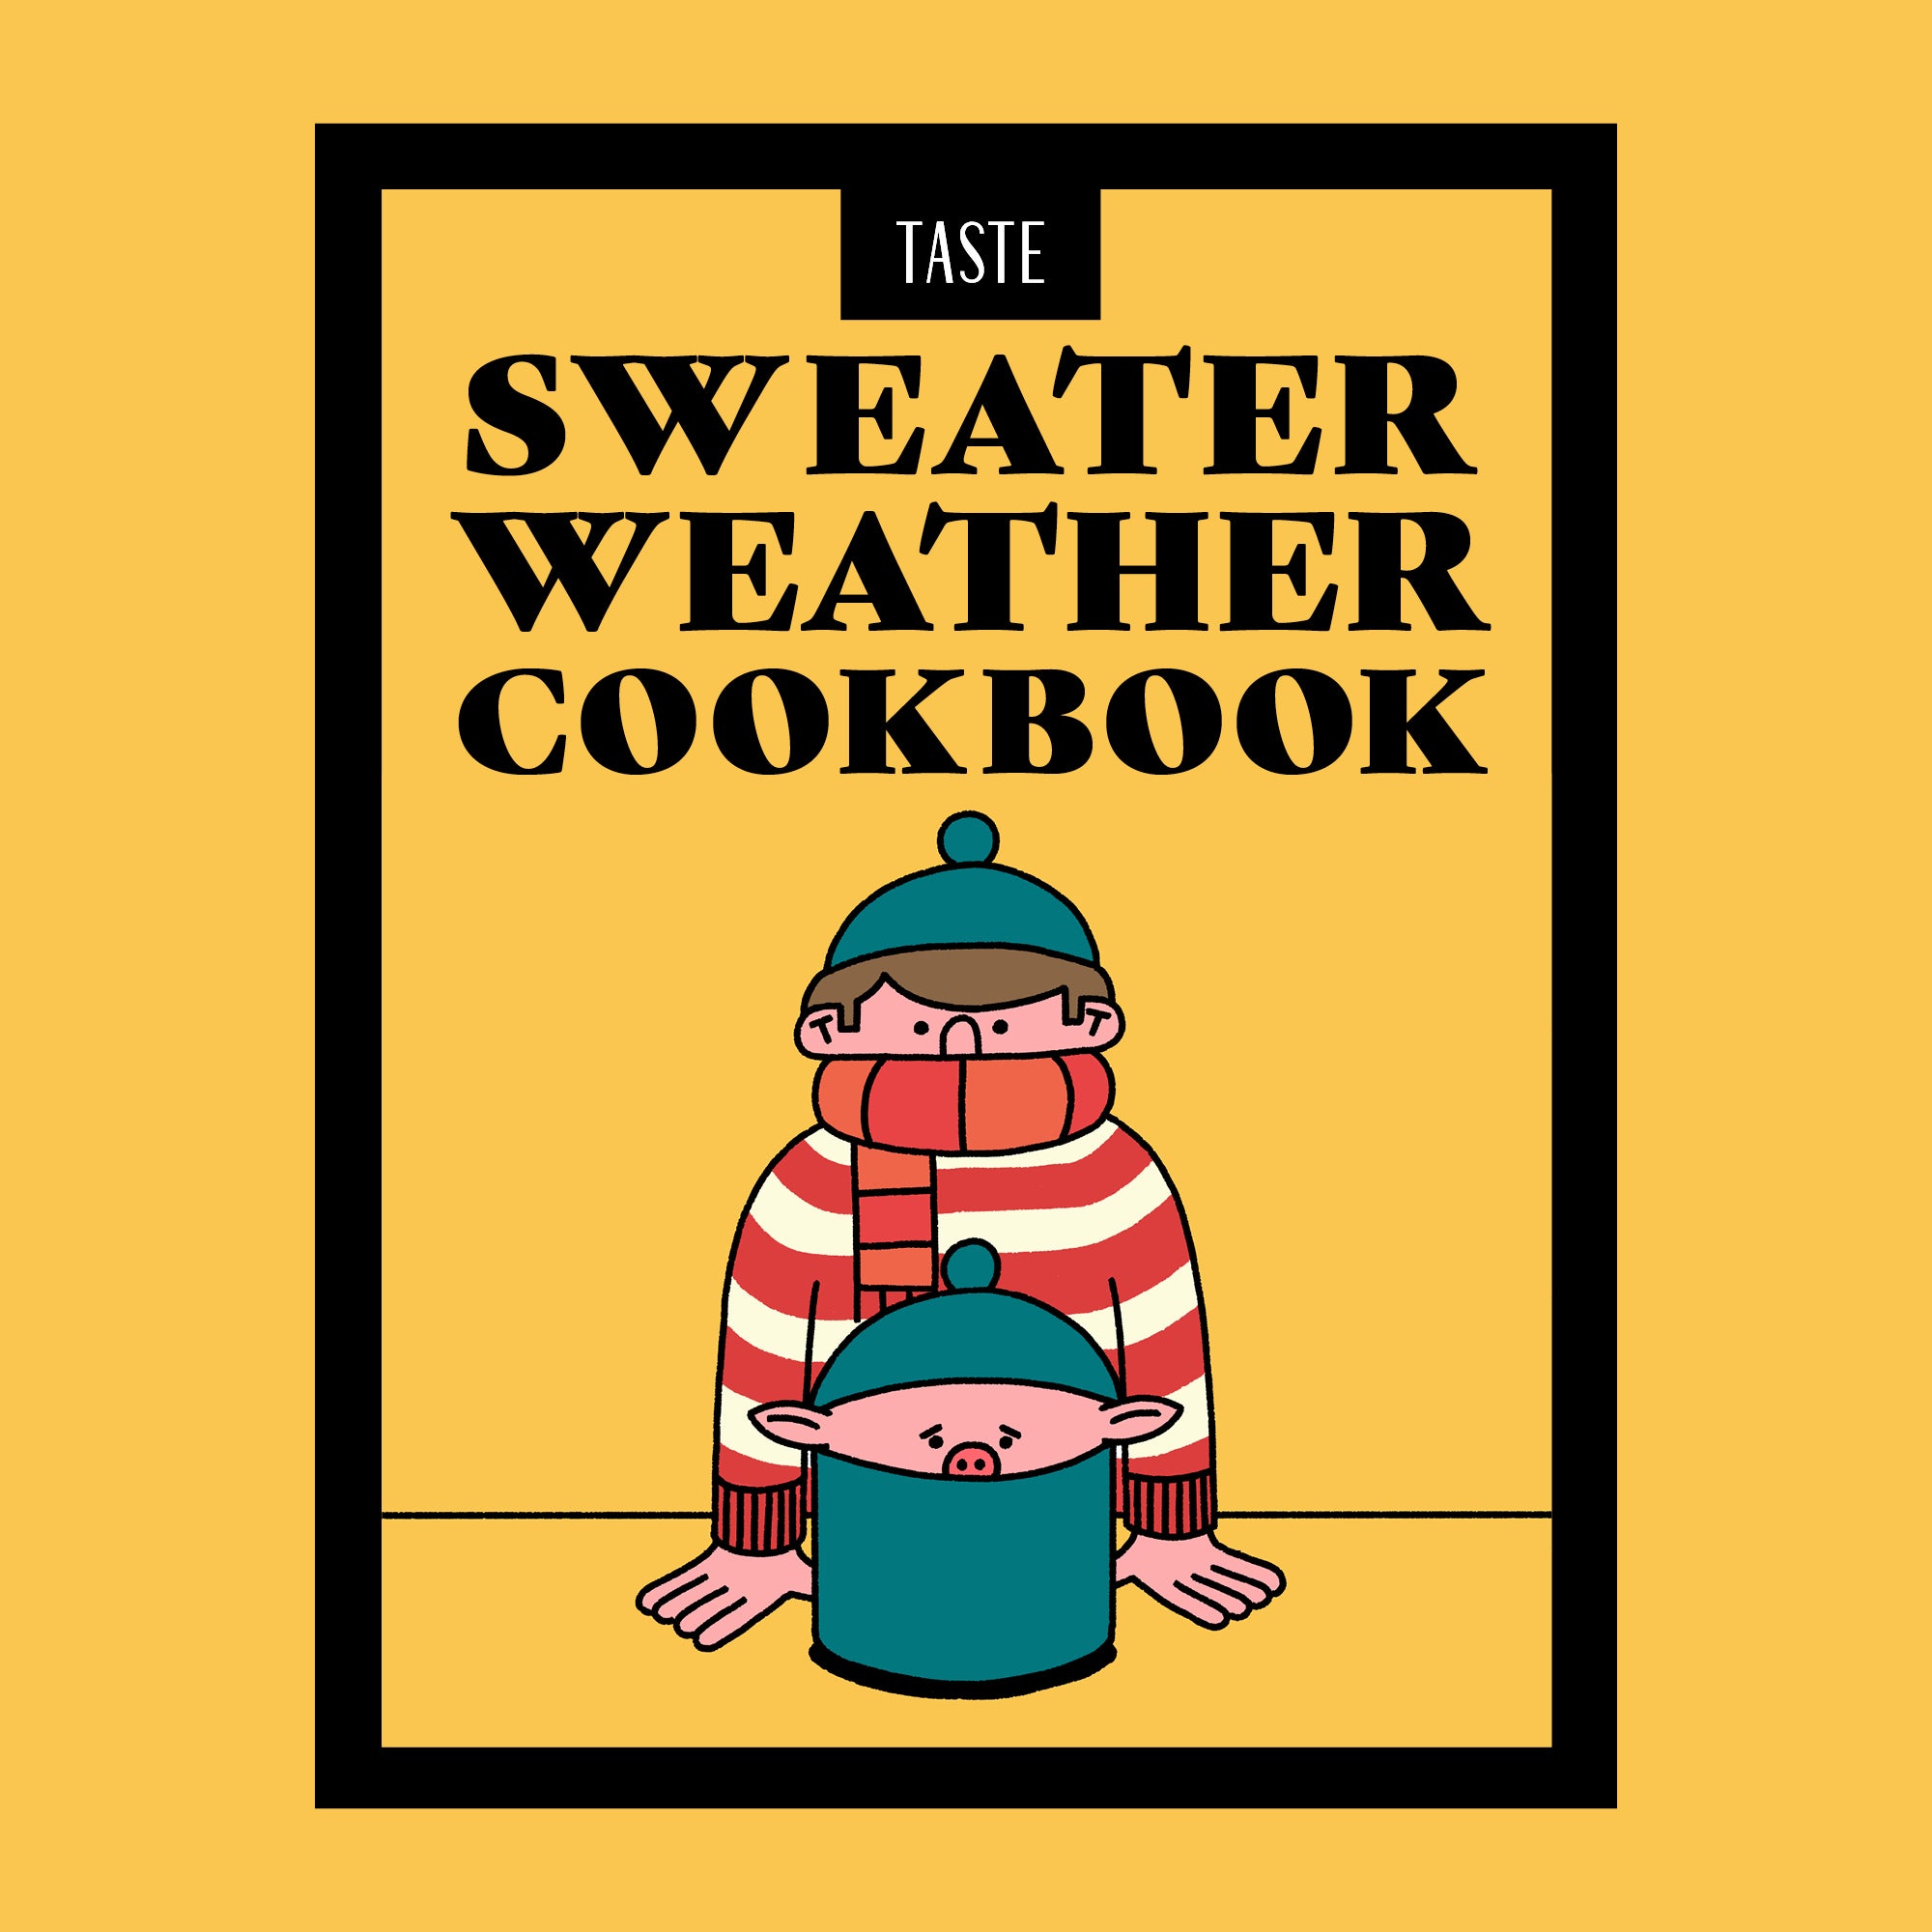 Download the Sweater Weather Cookbook